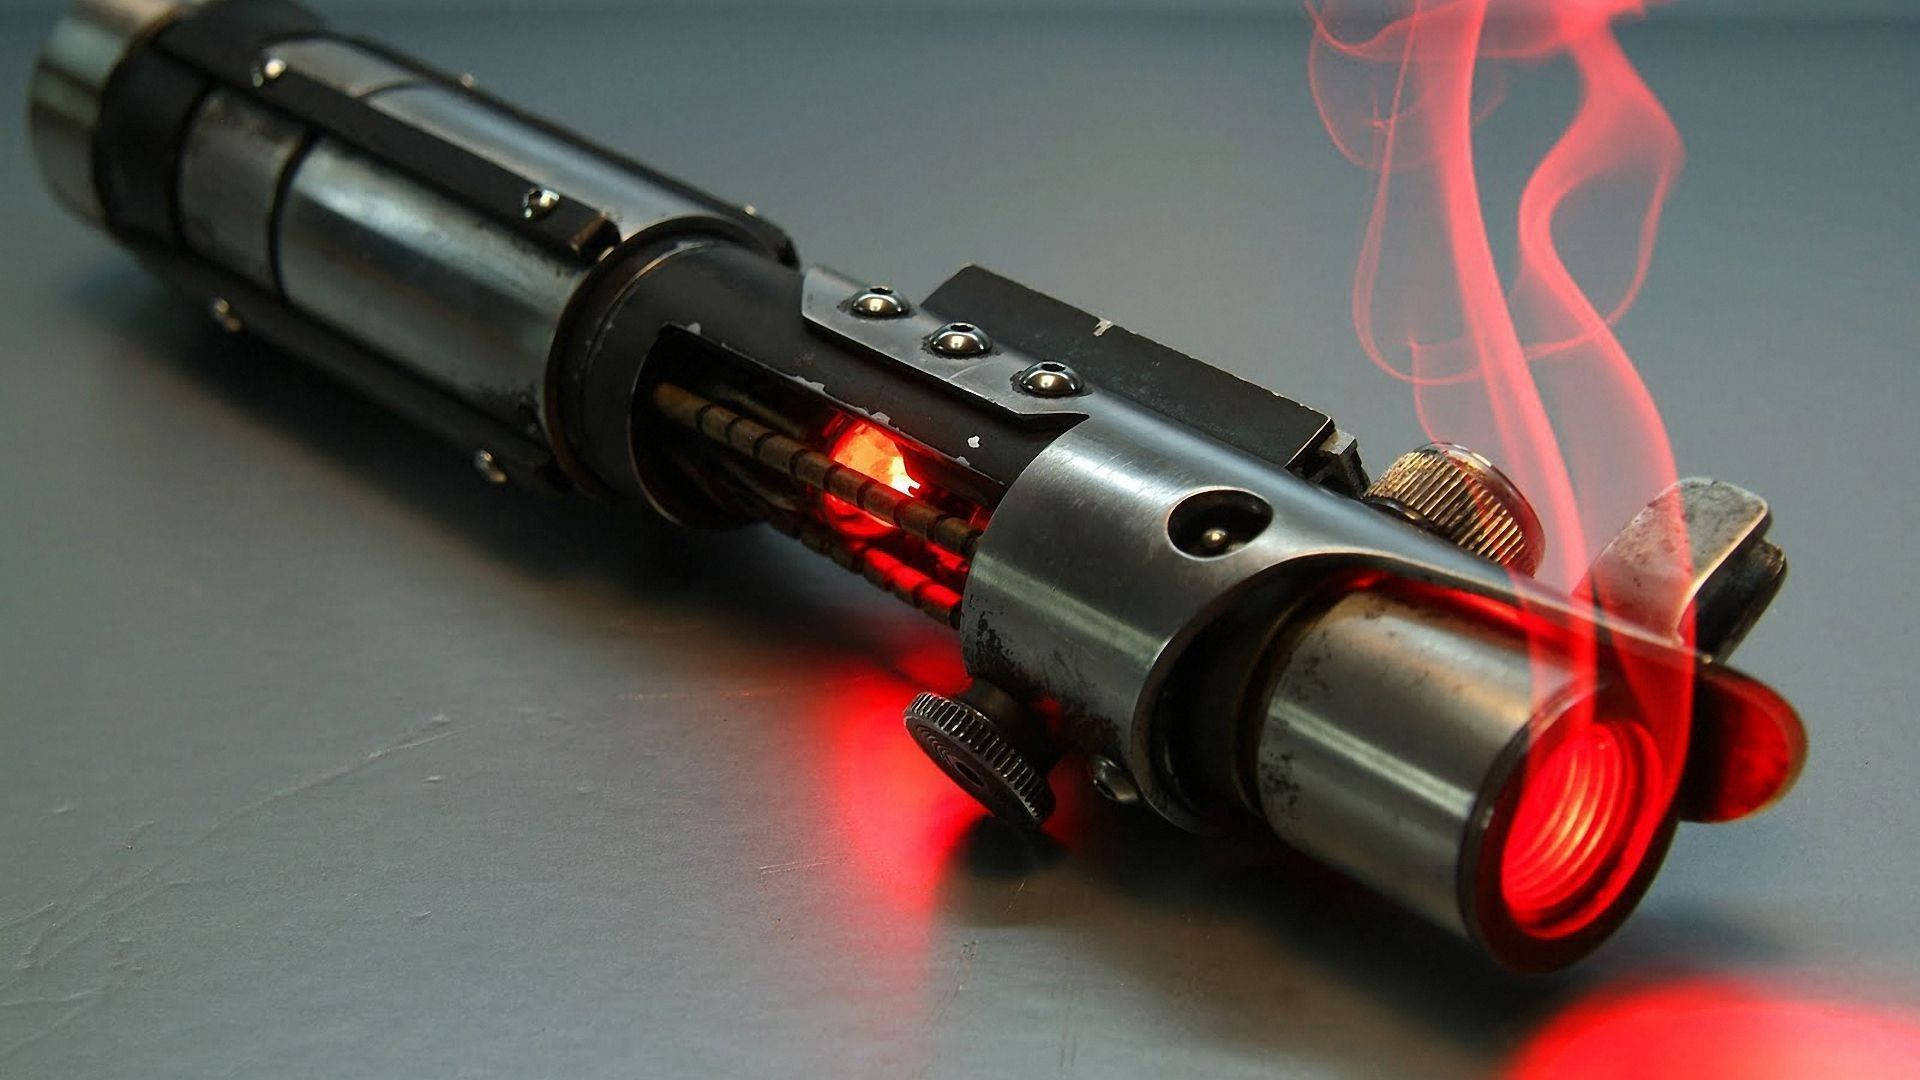 Unleash your inner Sith with this iconic red lightsaber Wallpaper